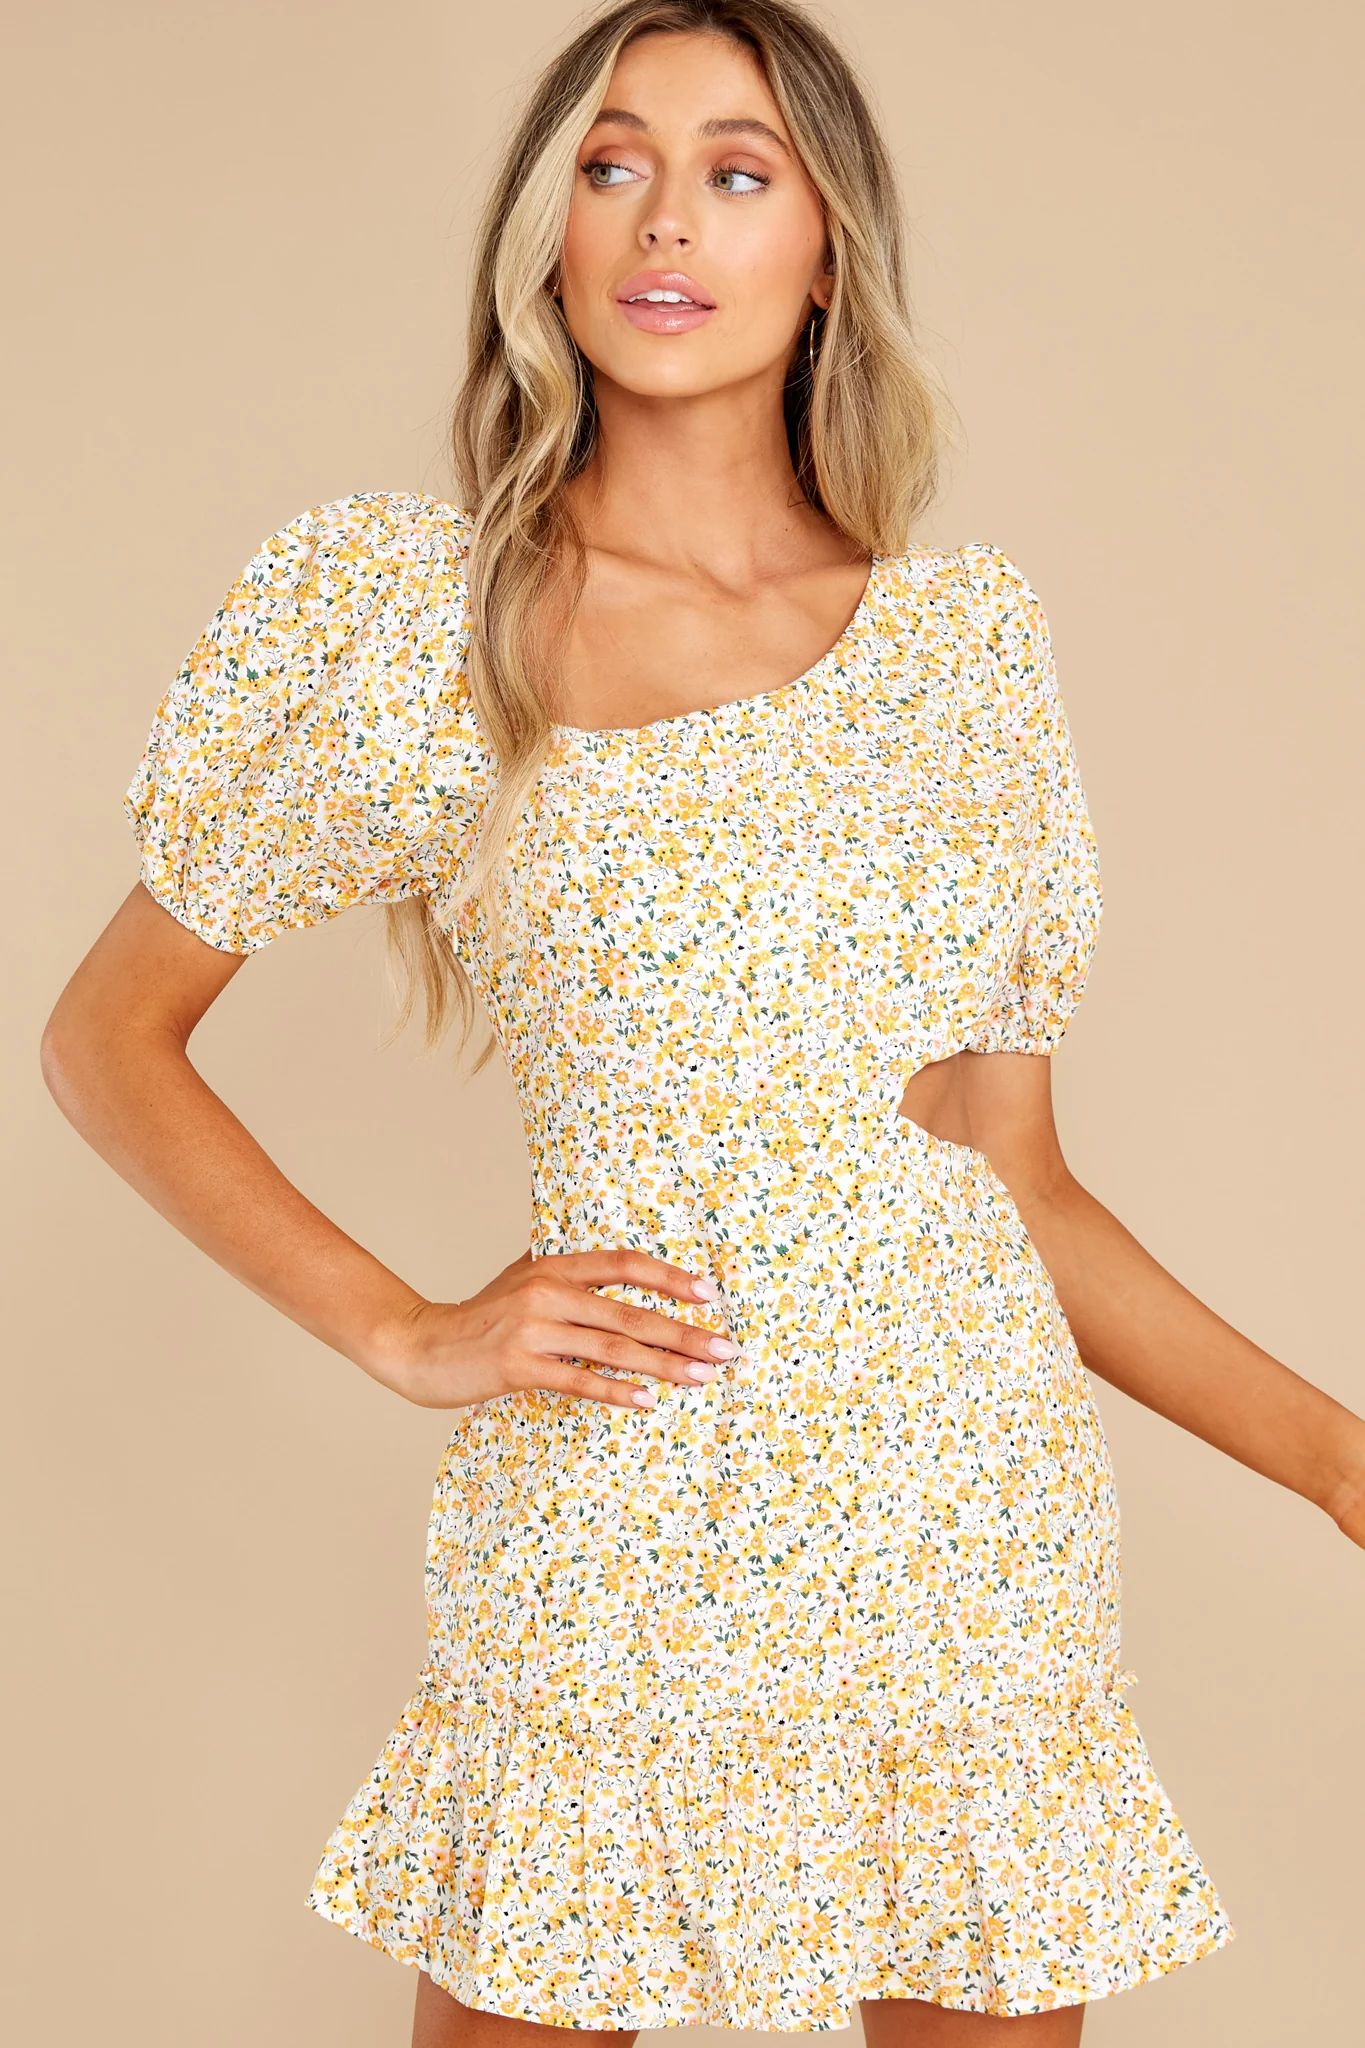 Lovely Details Yellow Floral Print Dress | Red Dress 